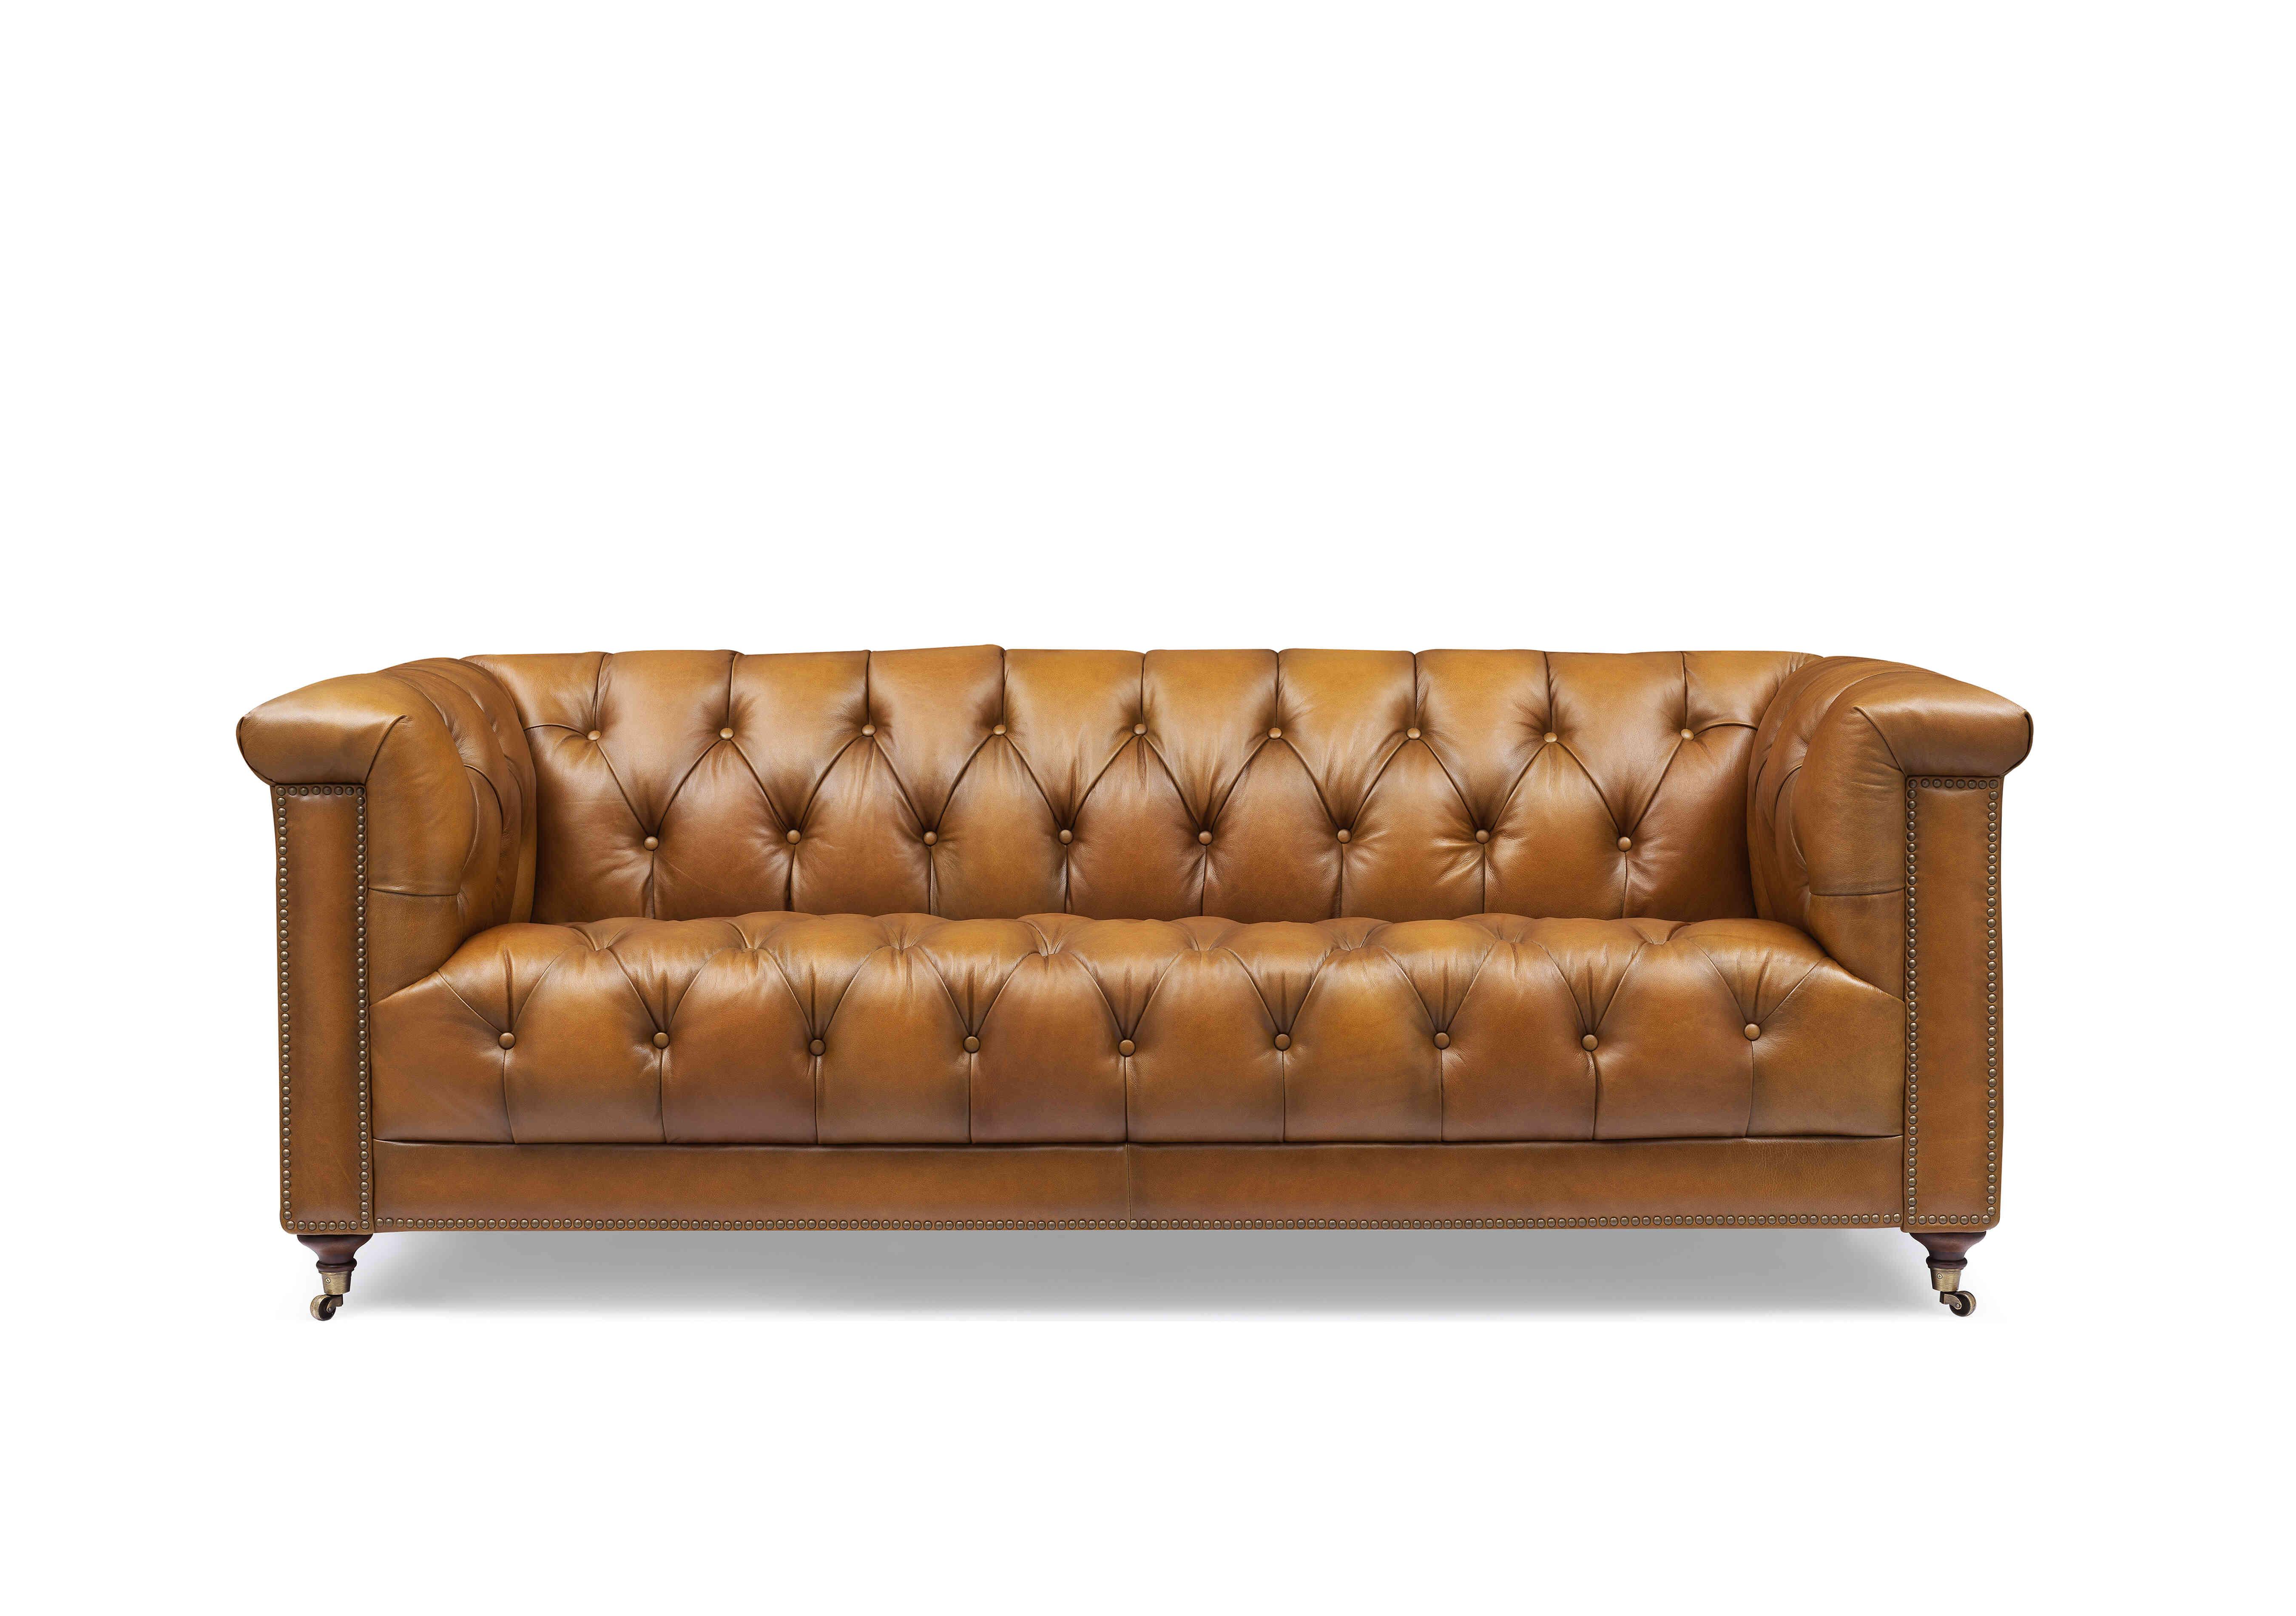 Wallace 3 Seater Leather Chesterfield Sofa with USB-C in X3y1-1957ls Inca on Furniture Village